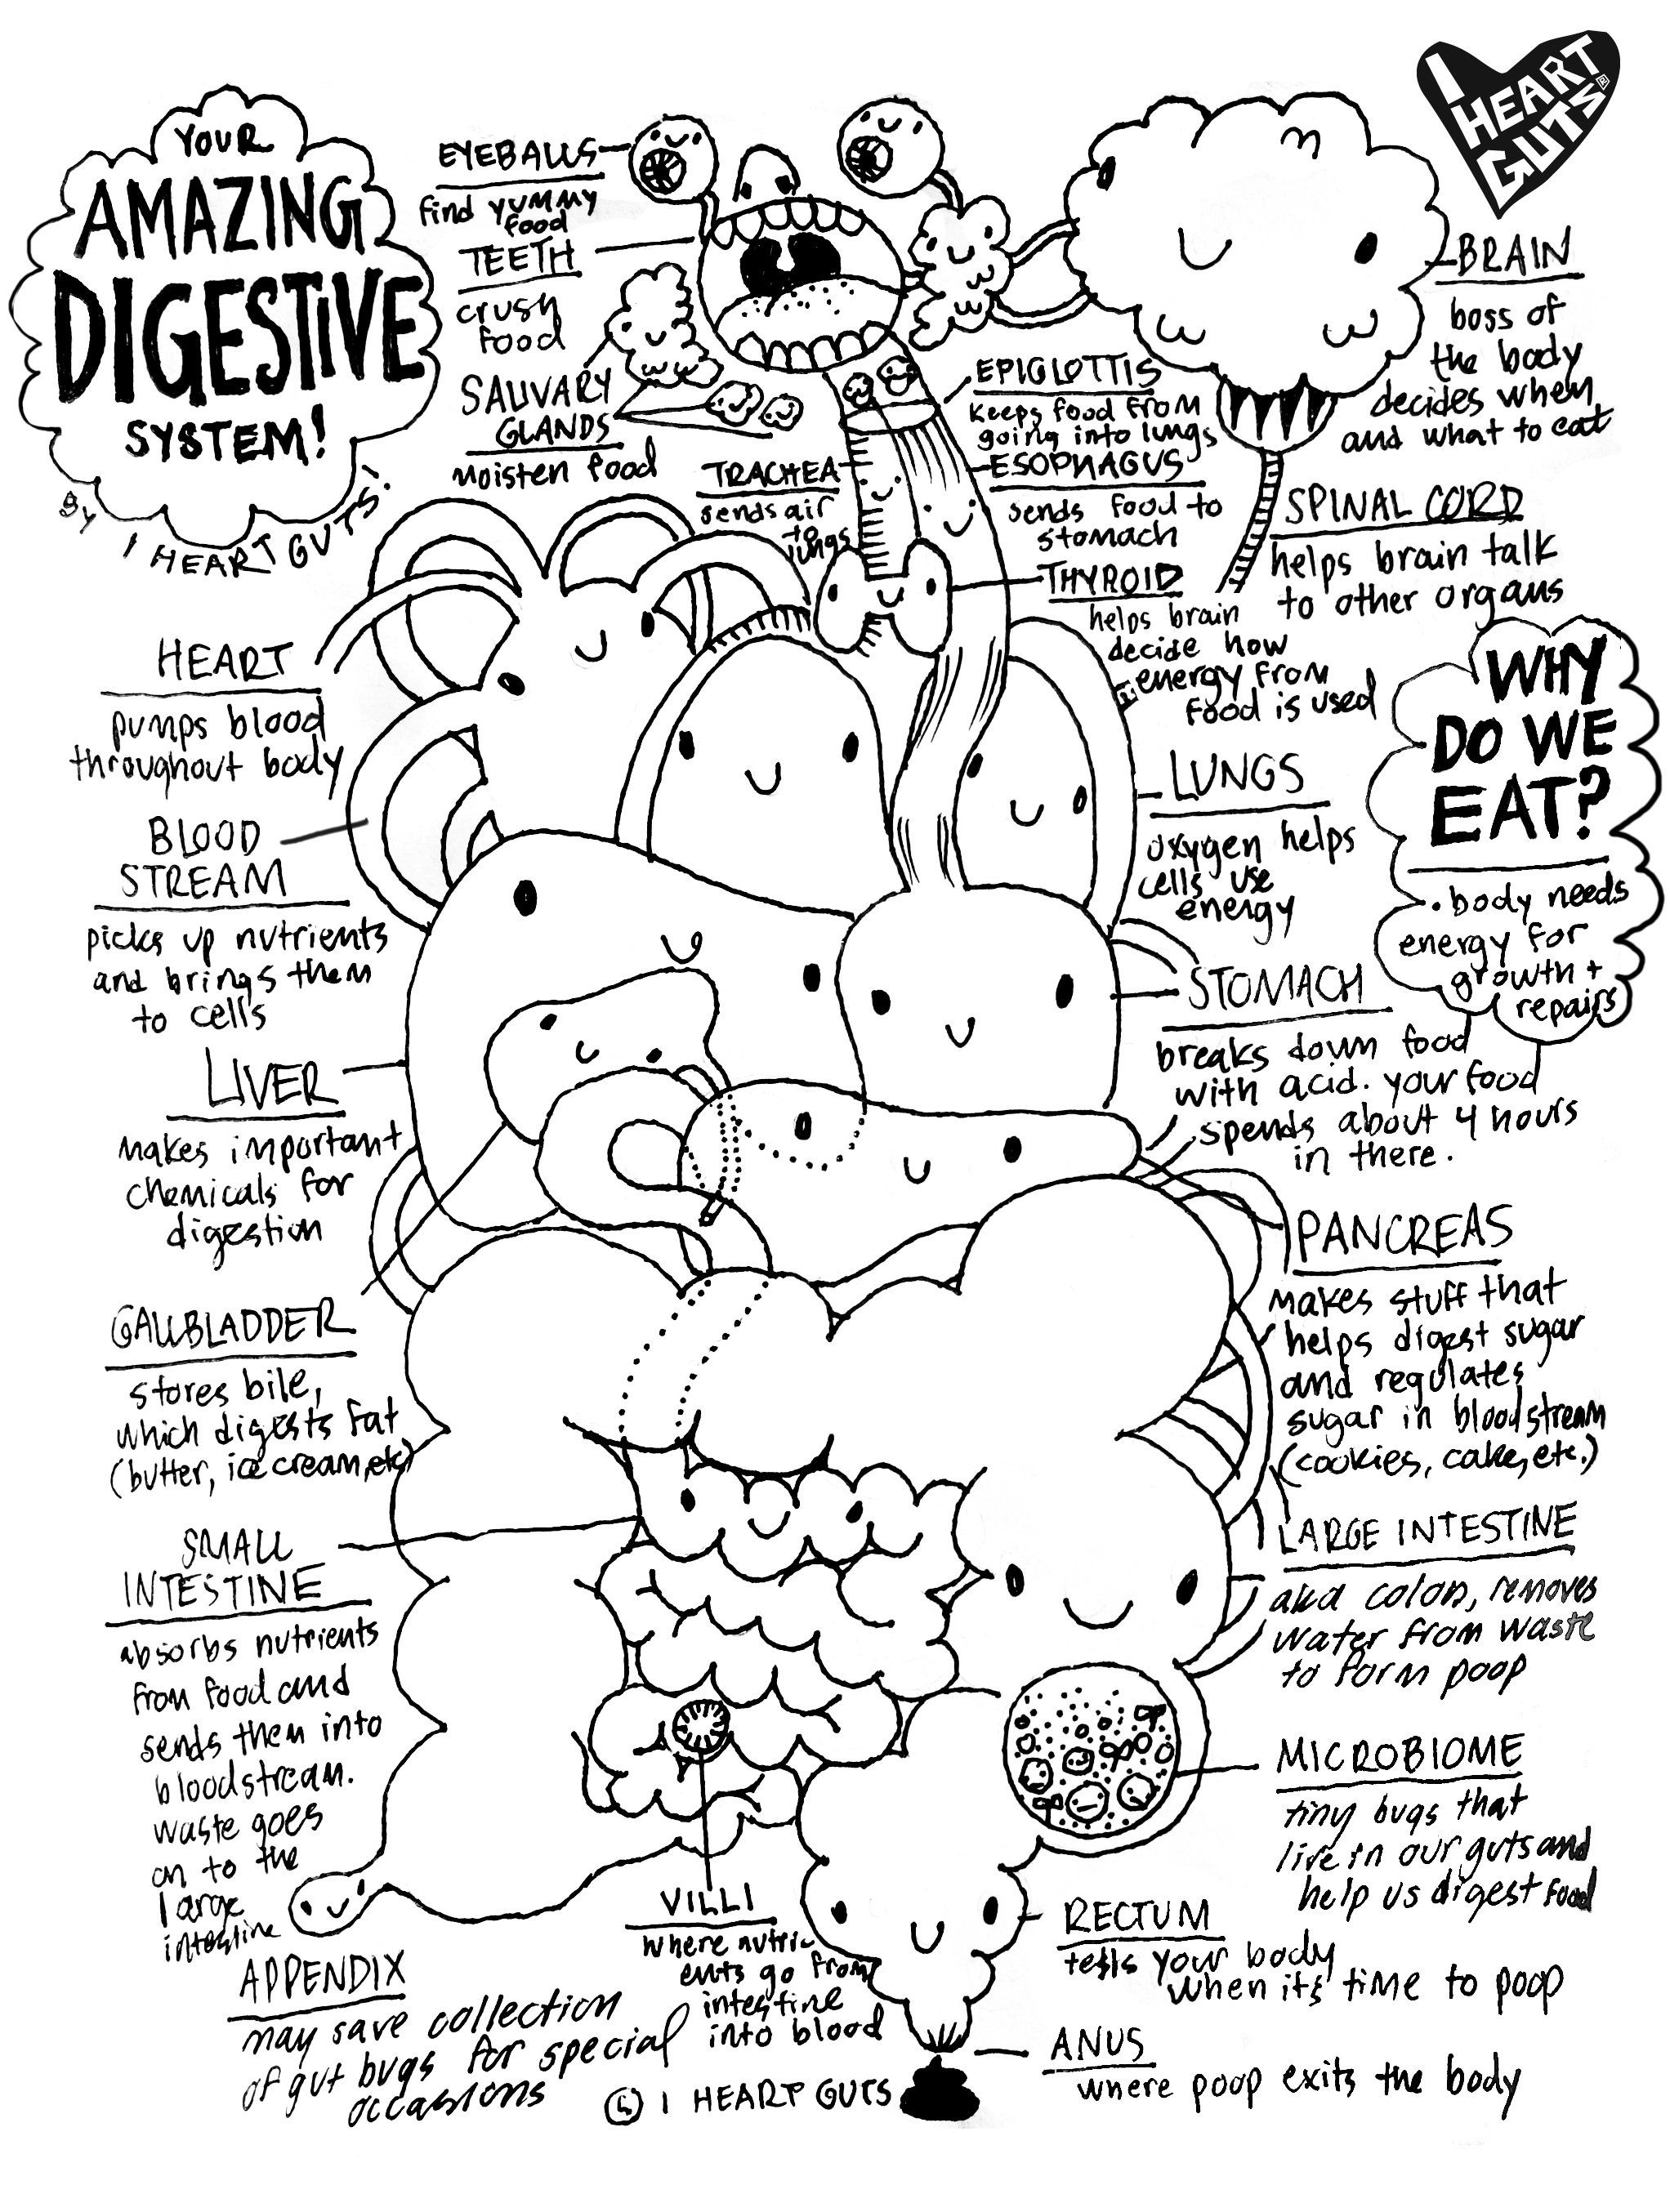 digestive system coloring sheet digestive system coloring sheet coloring sheet digestive system 